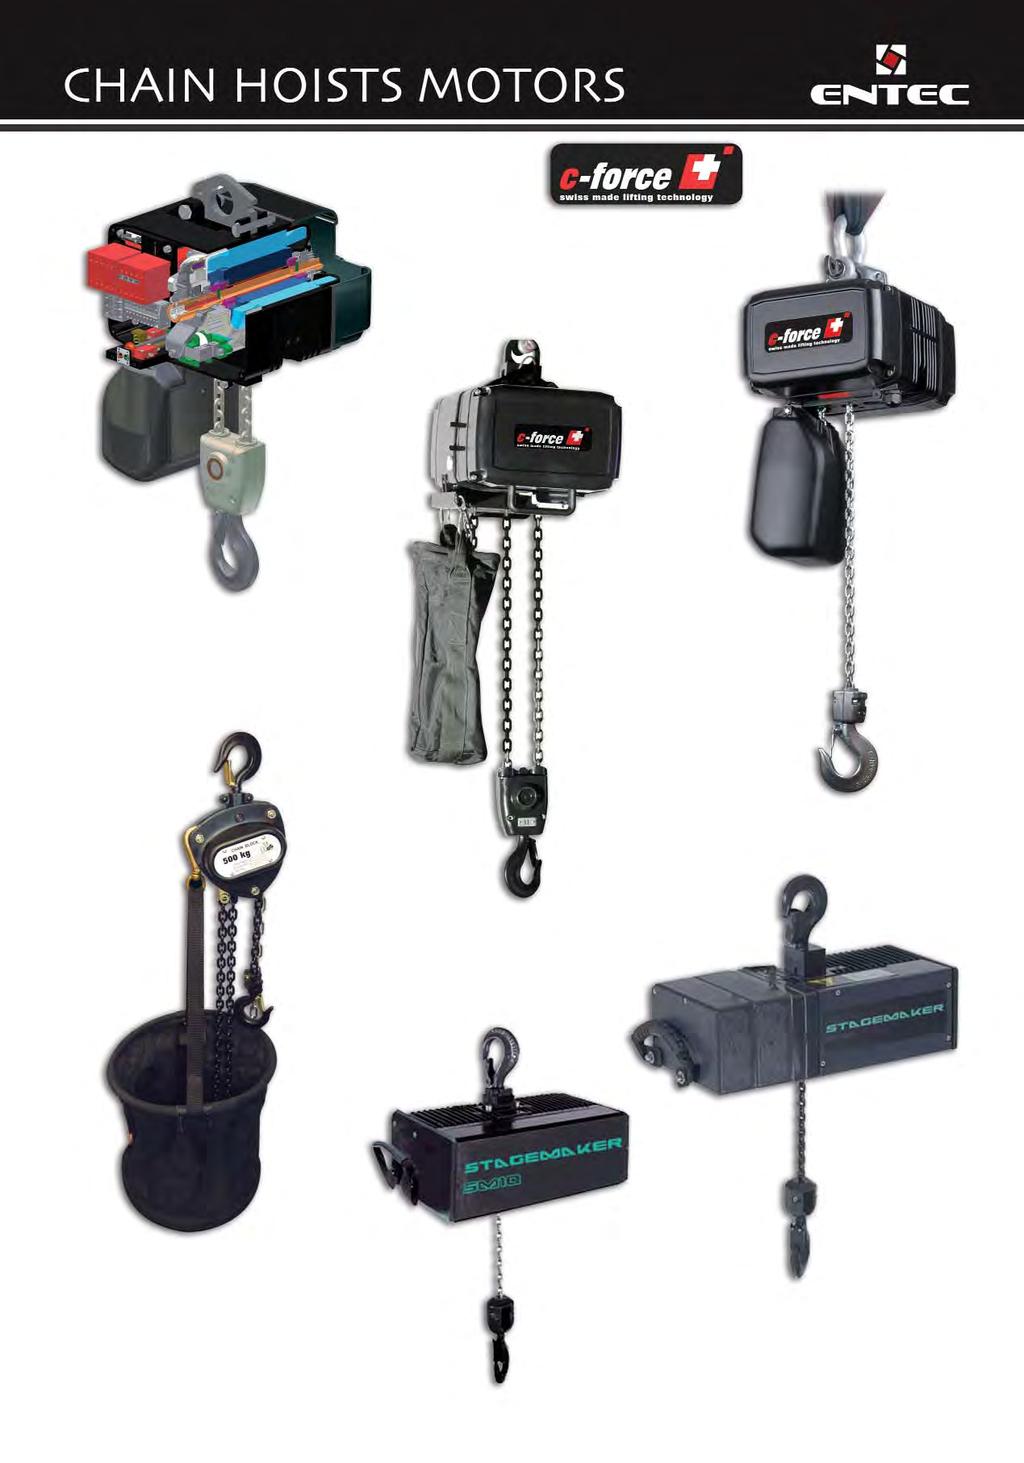 C-force: Electric chain hoist, capacity from 125 Kg to 2.500 Kg.